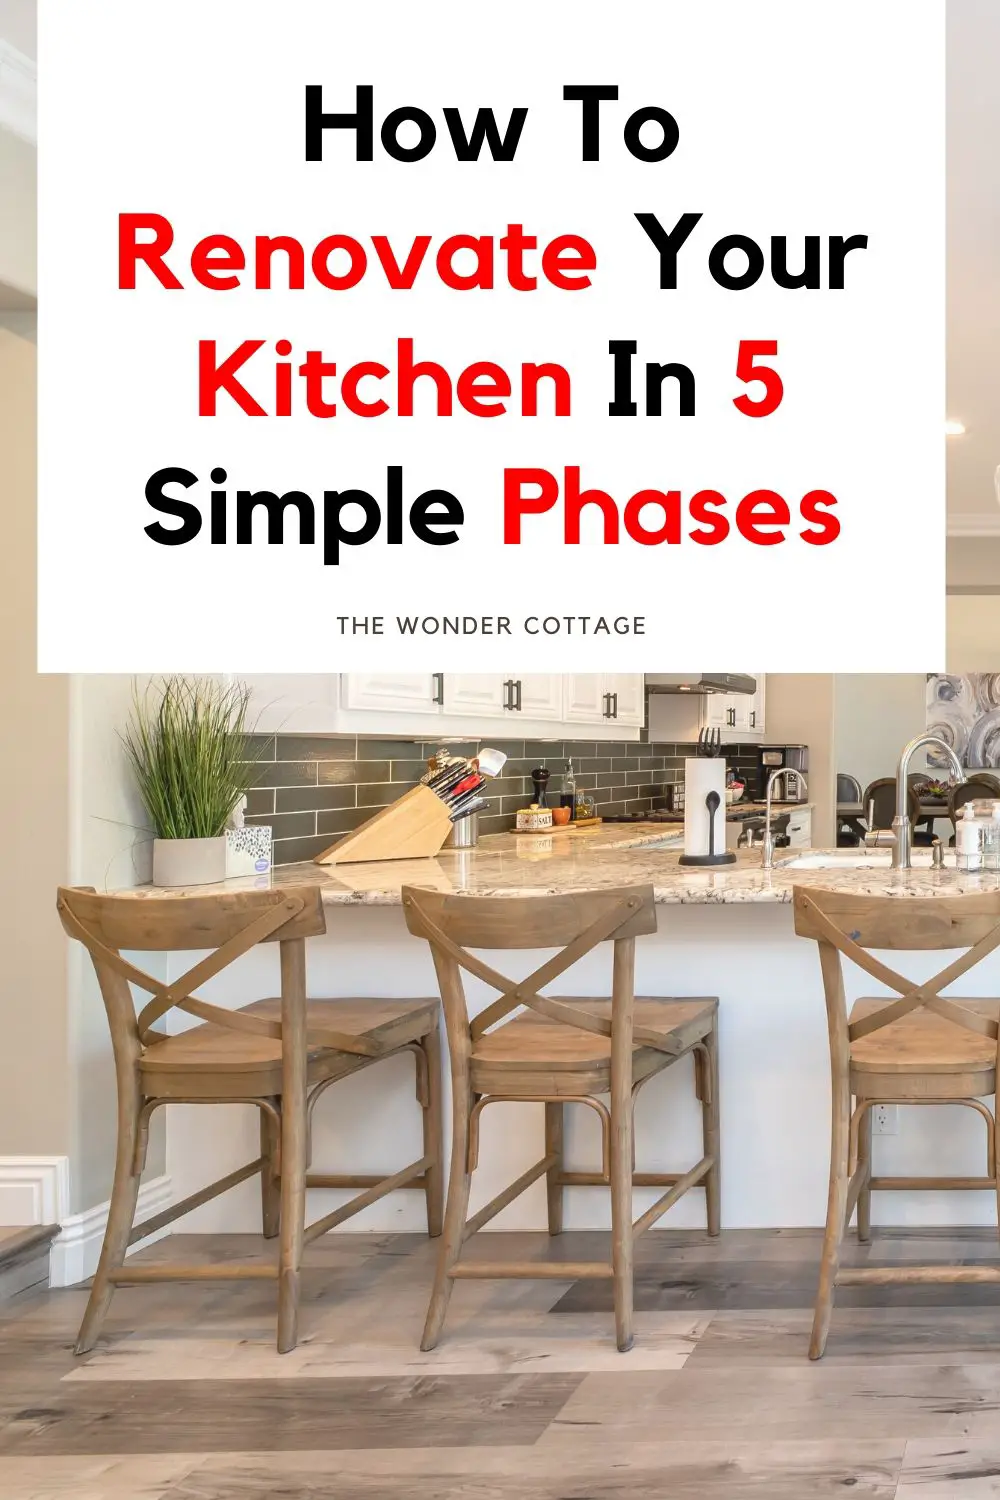 How to renovate your kitchen in 5 simple phases